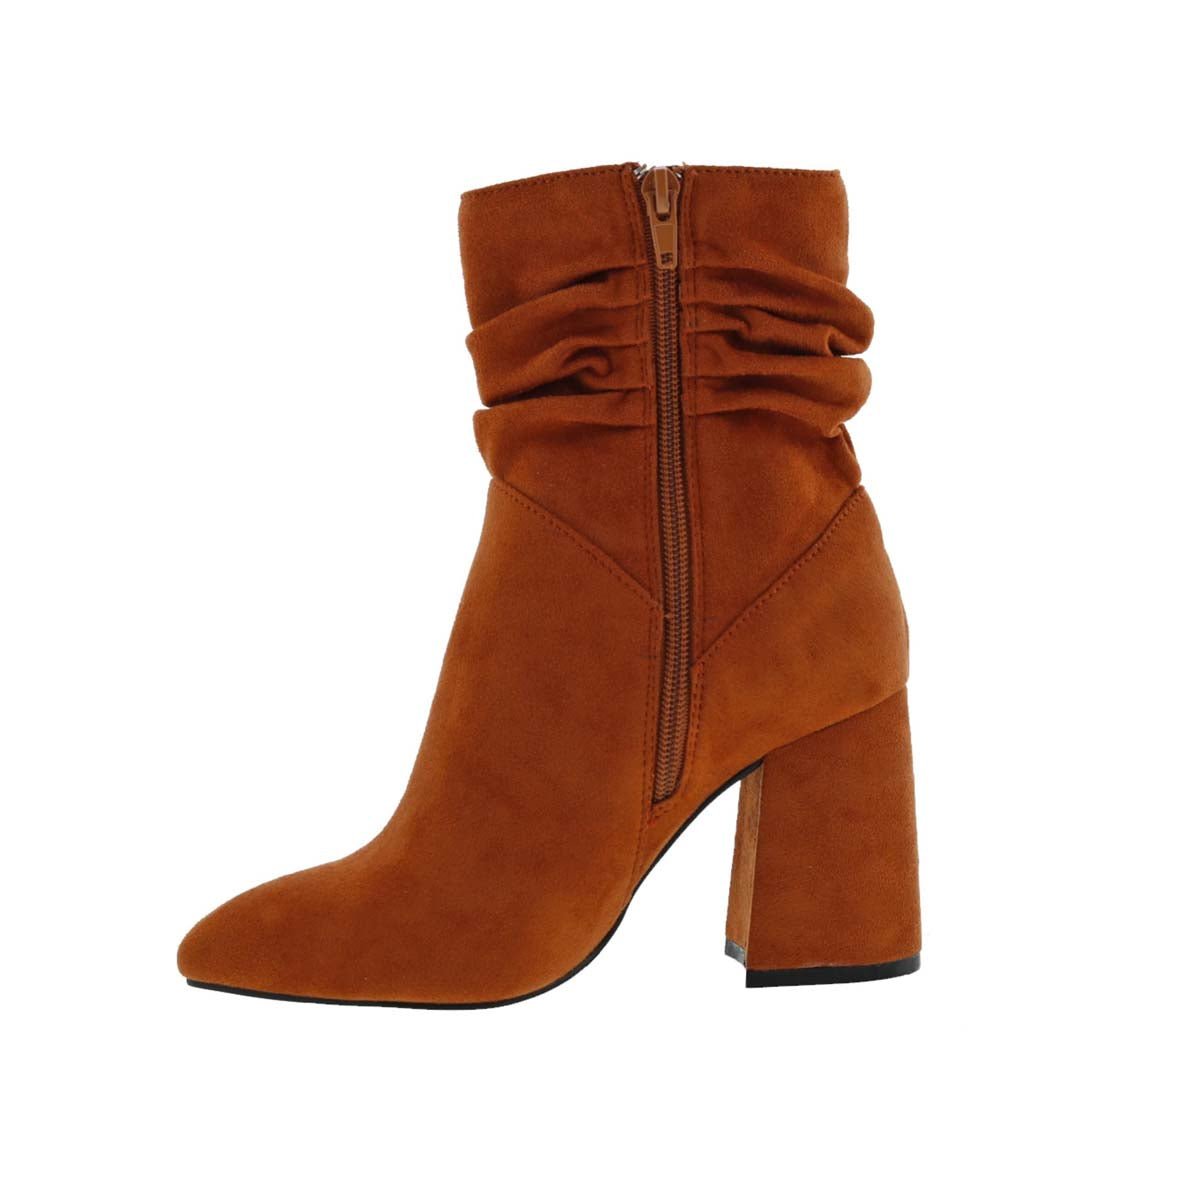 BELLINI CARSON WOMEN BOOTS IN RUST MICROSUEDE - TLW Shoes